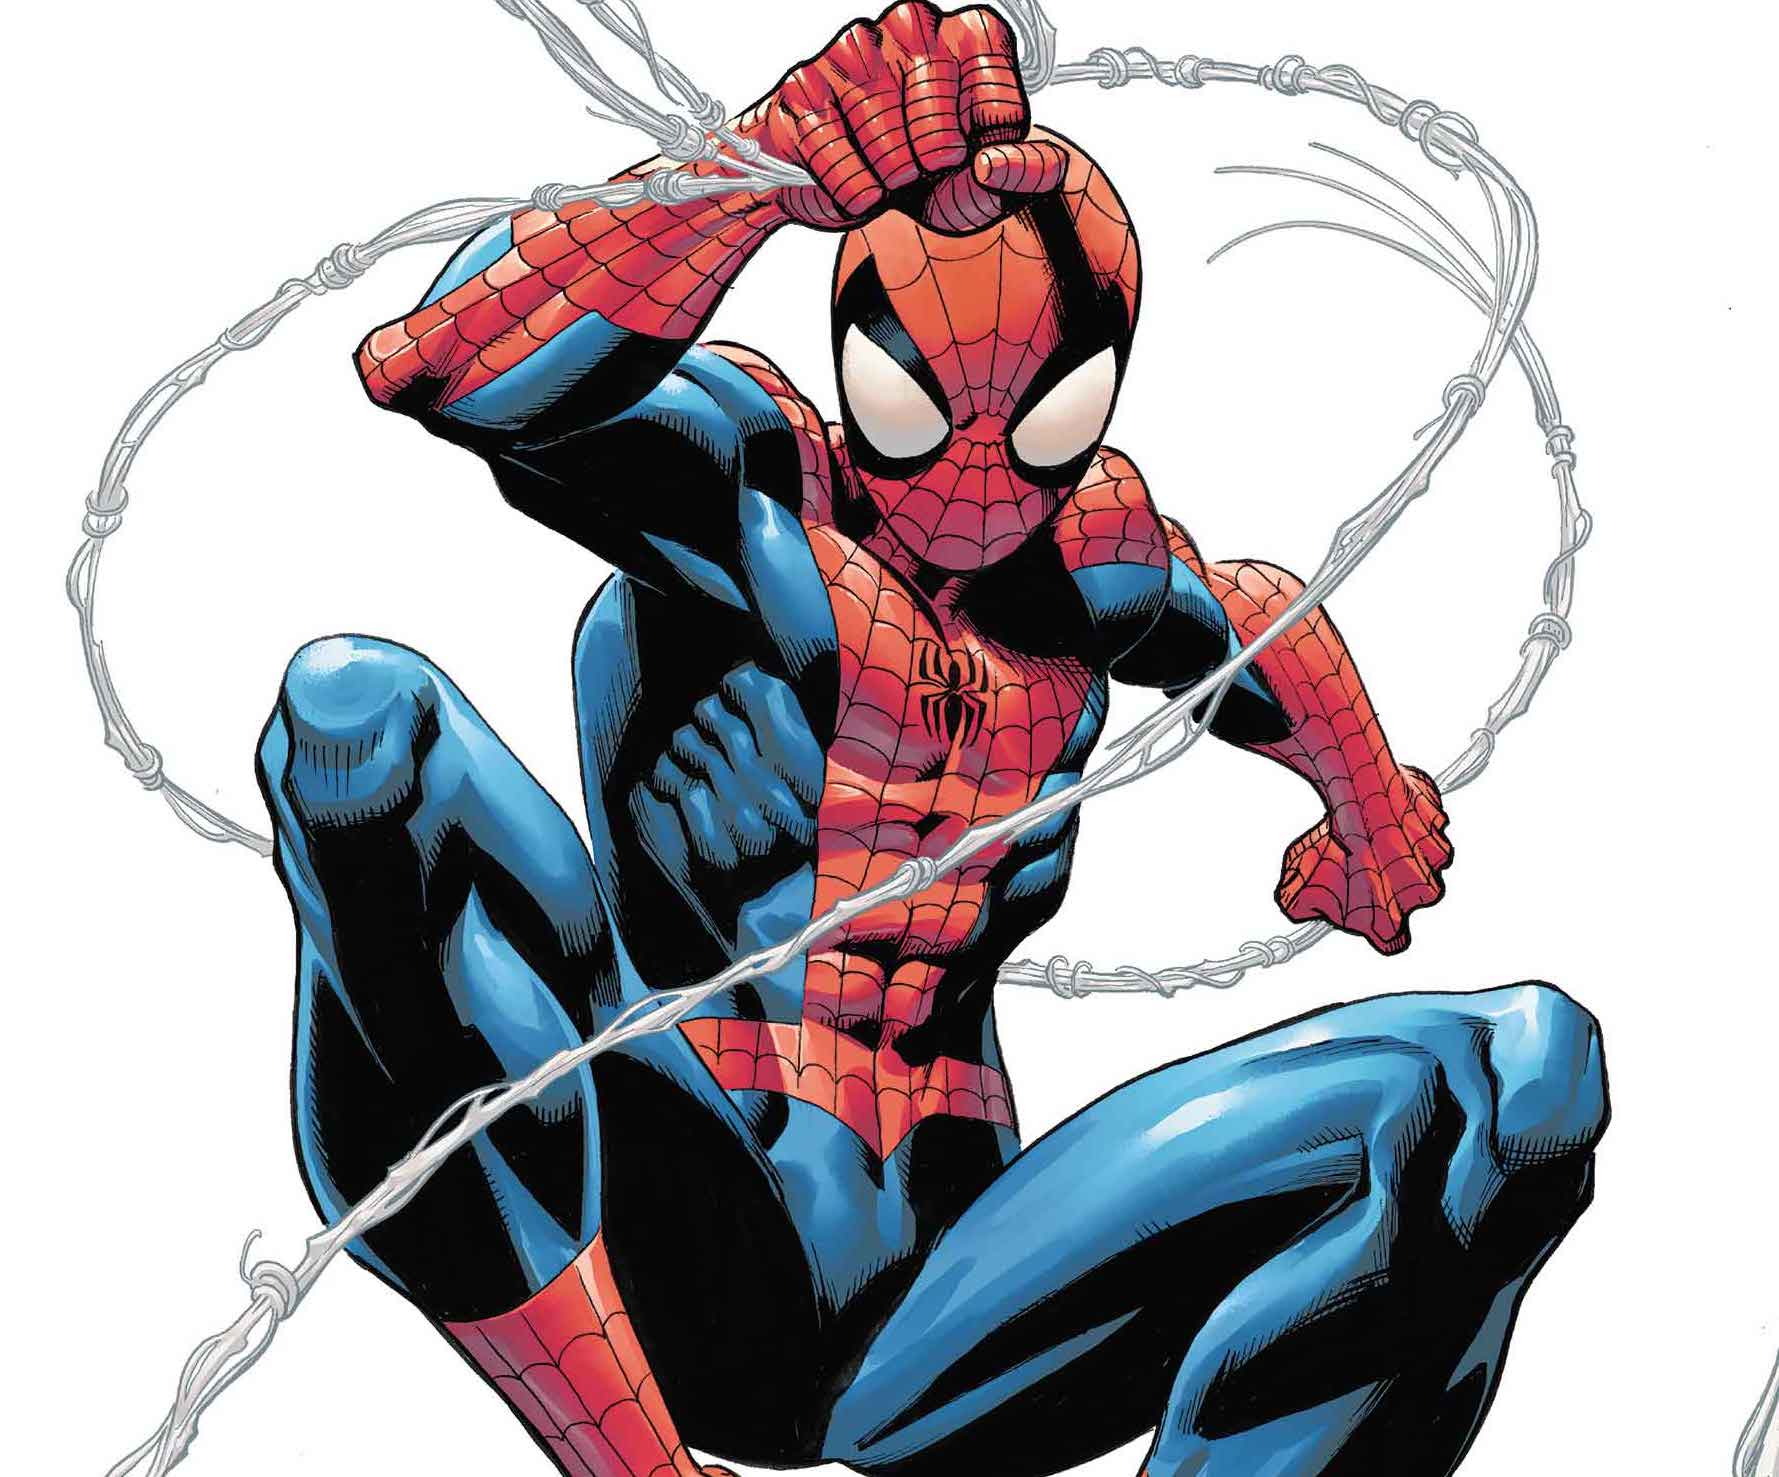 Spider-Man #1 (LGY #157) review